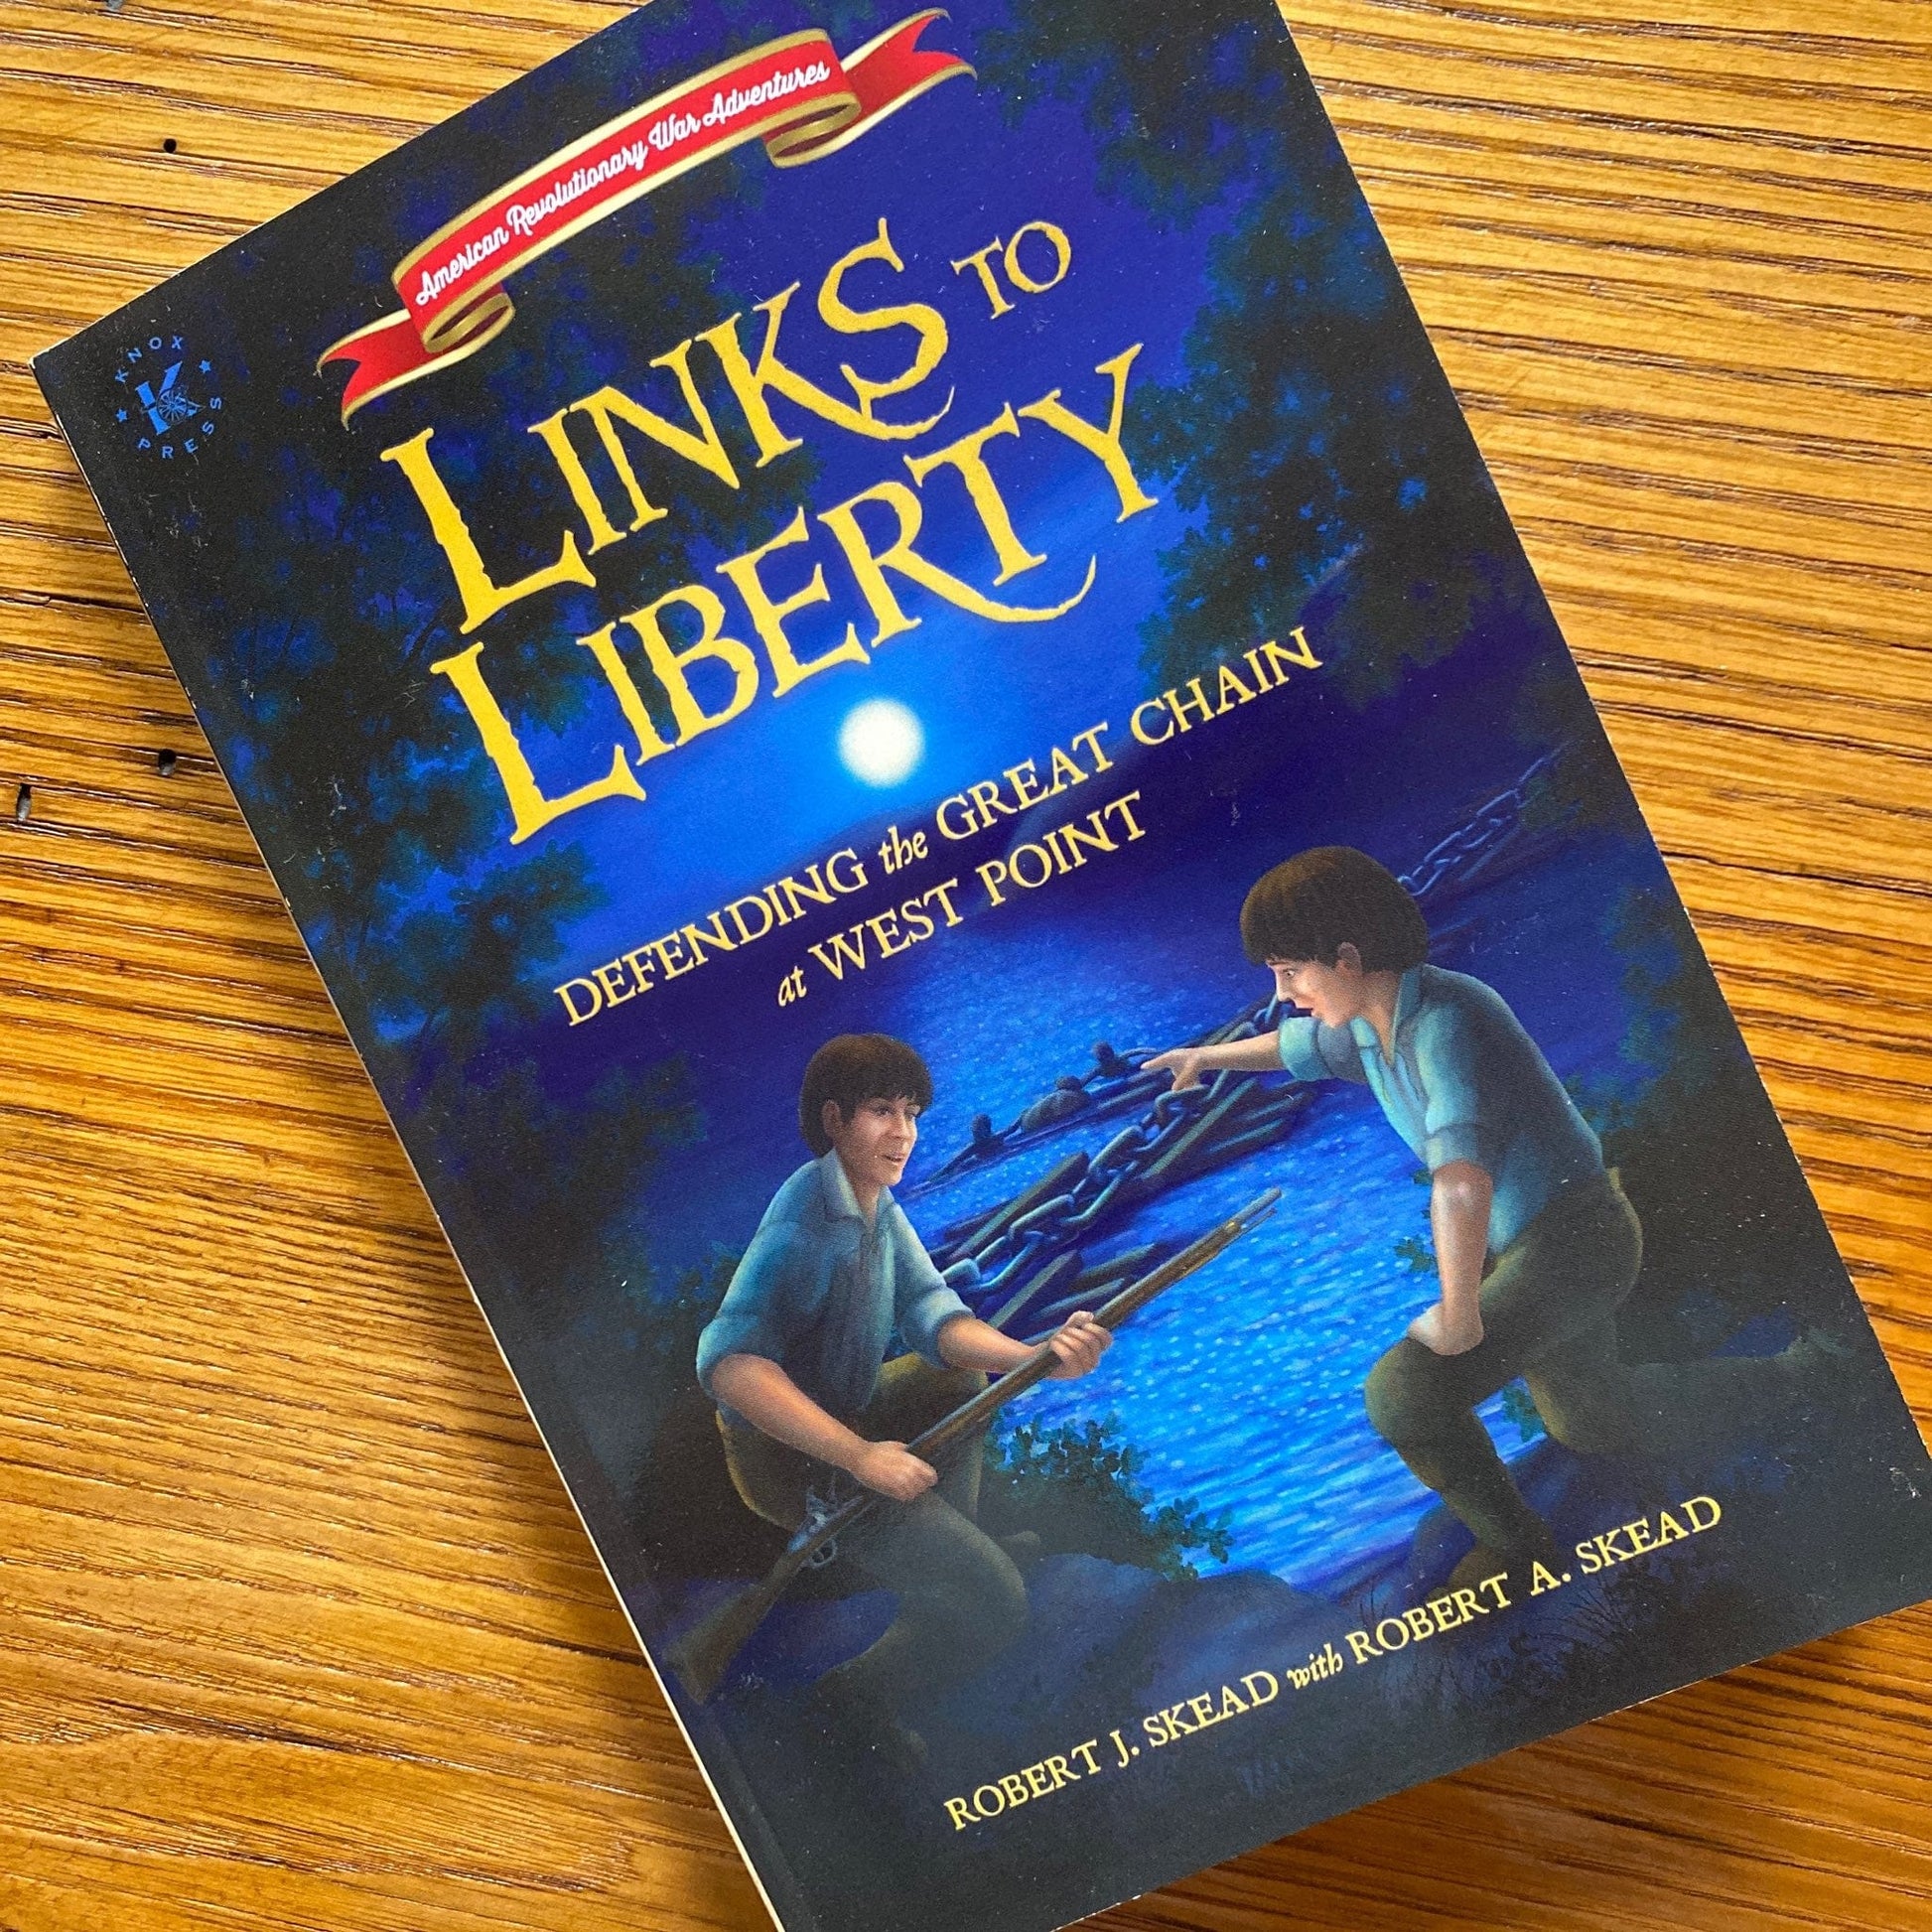 Book cover of "Links to Liberty: Defending the Great Chain at West Point" - Signed by the Authors, Robert J. Skead and Robert A. Skead from The History List store